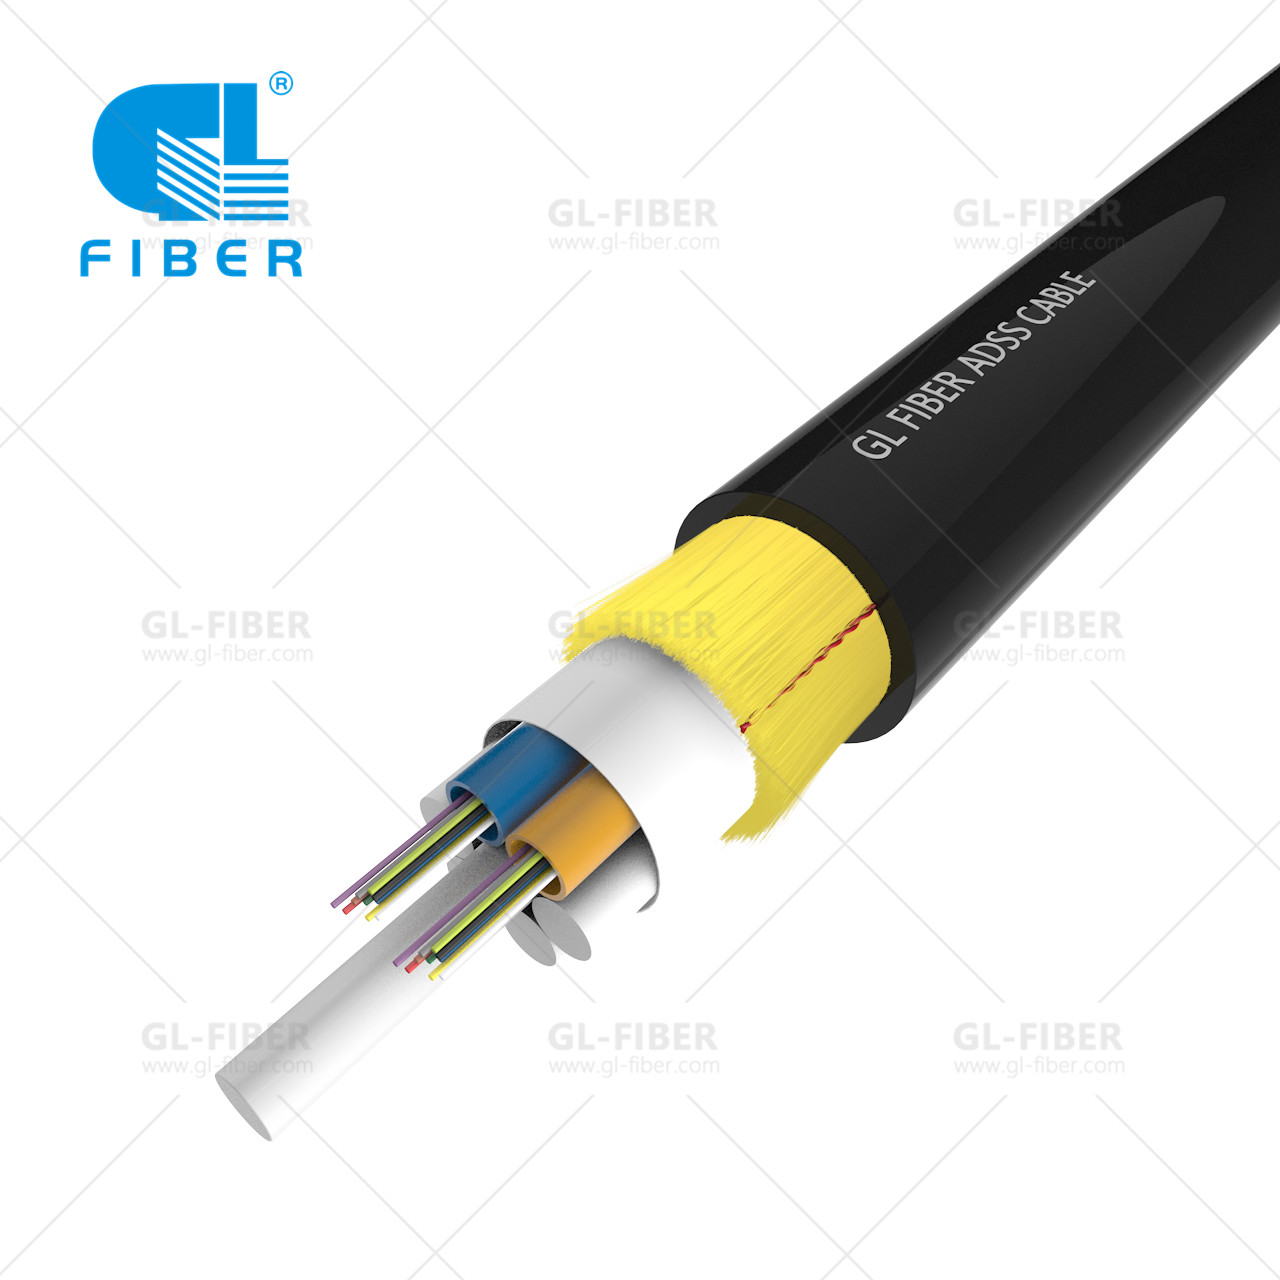 How to Properly Install ADSS Fiber Cable?